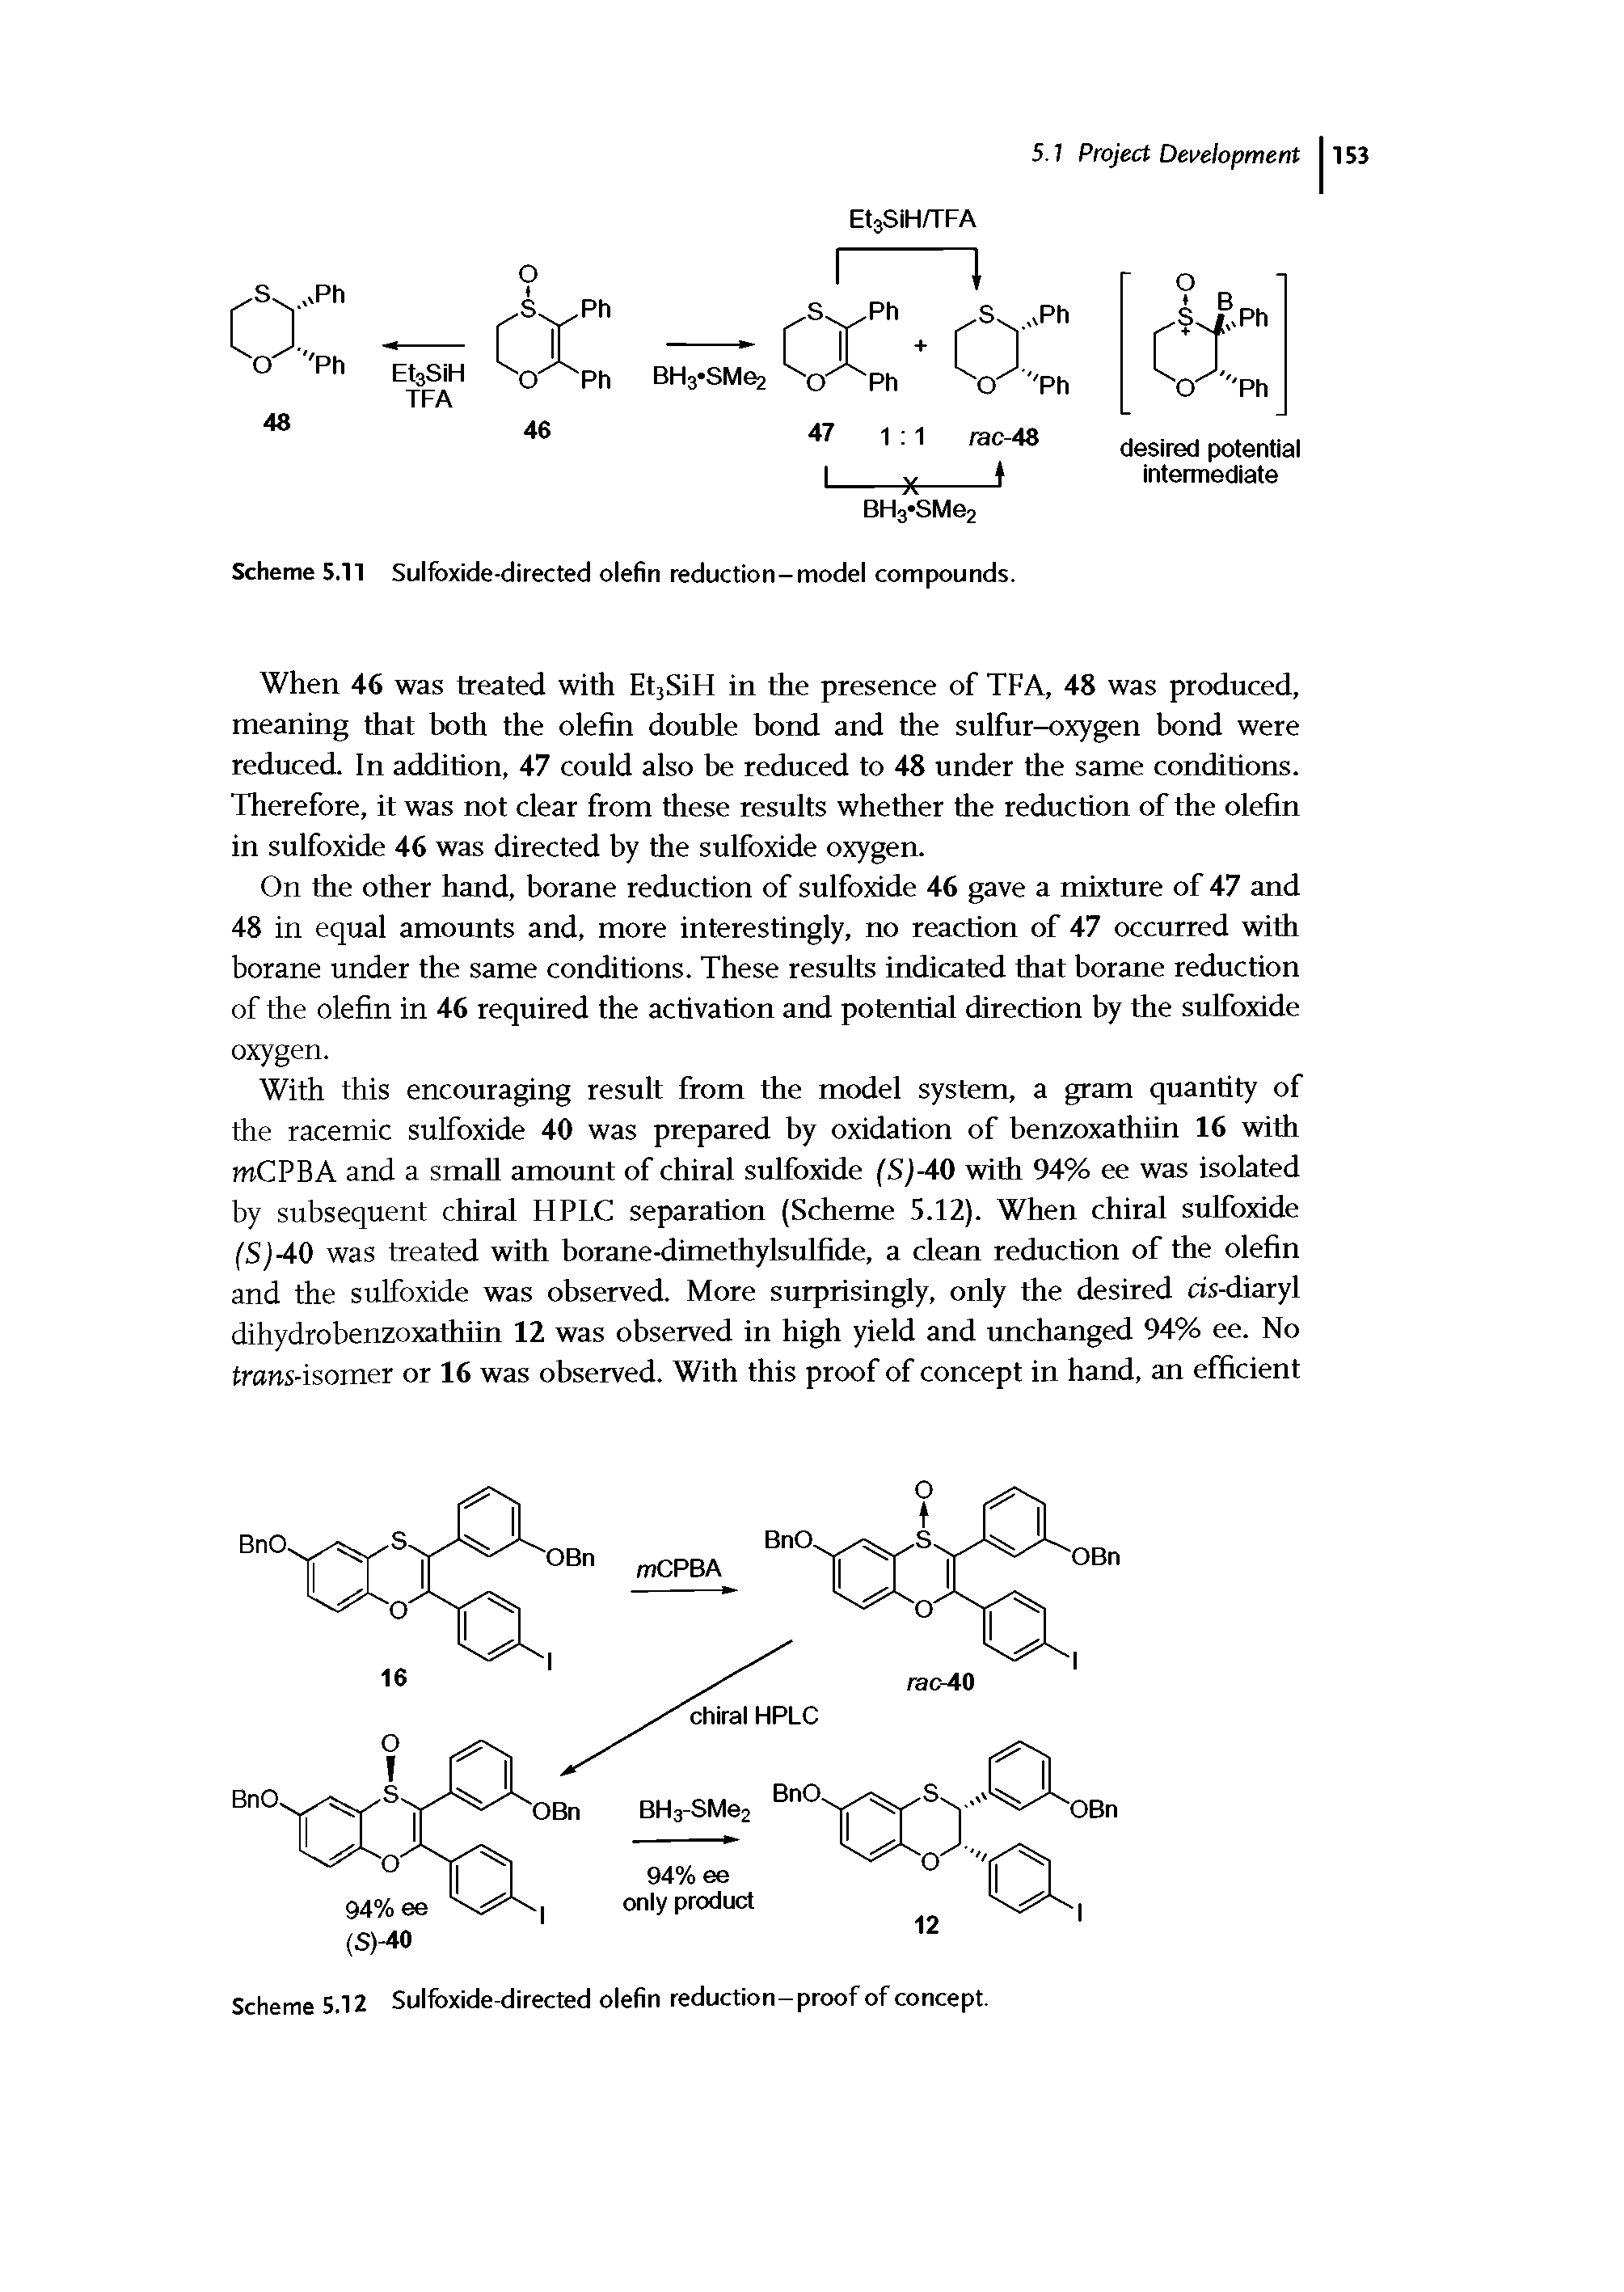 Scheme 5.12 Sulfoxide-directed olefin reduction-proof of concept.